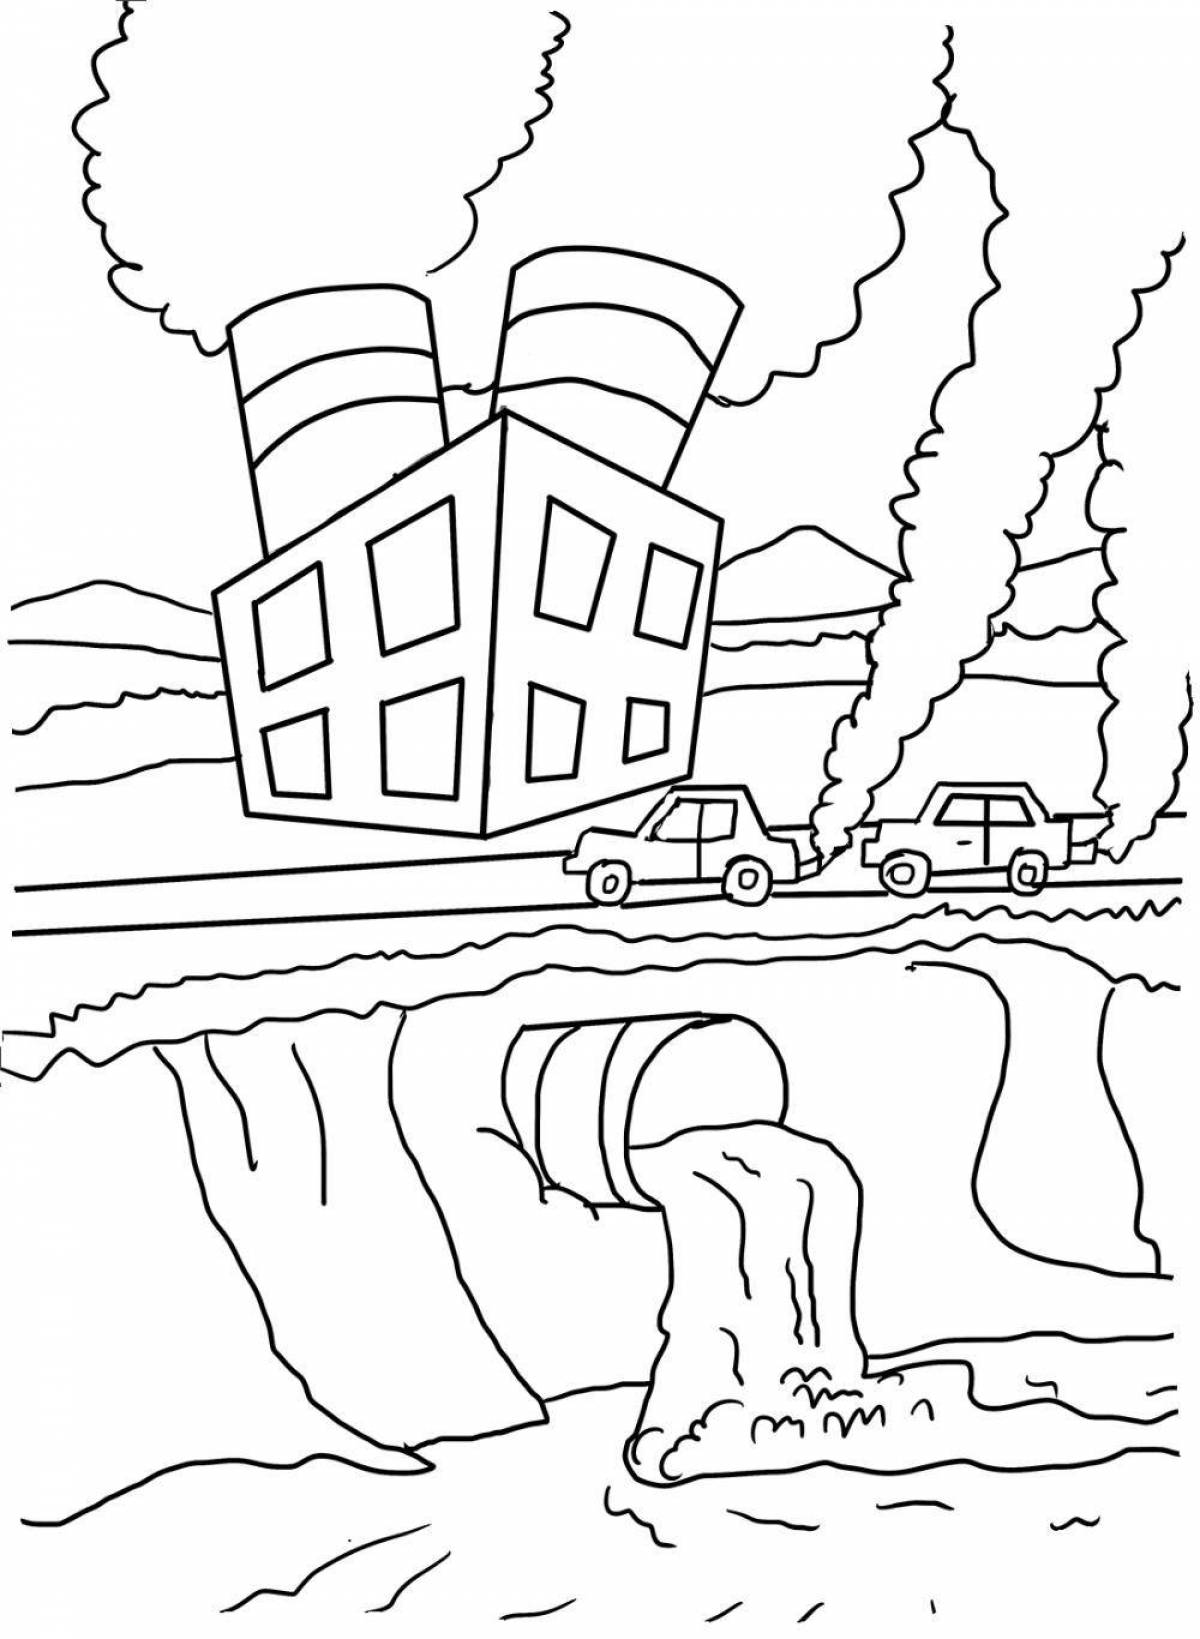 Air pollution coloring page